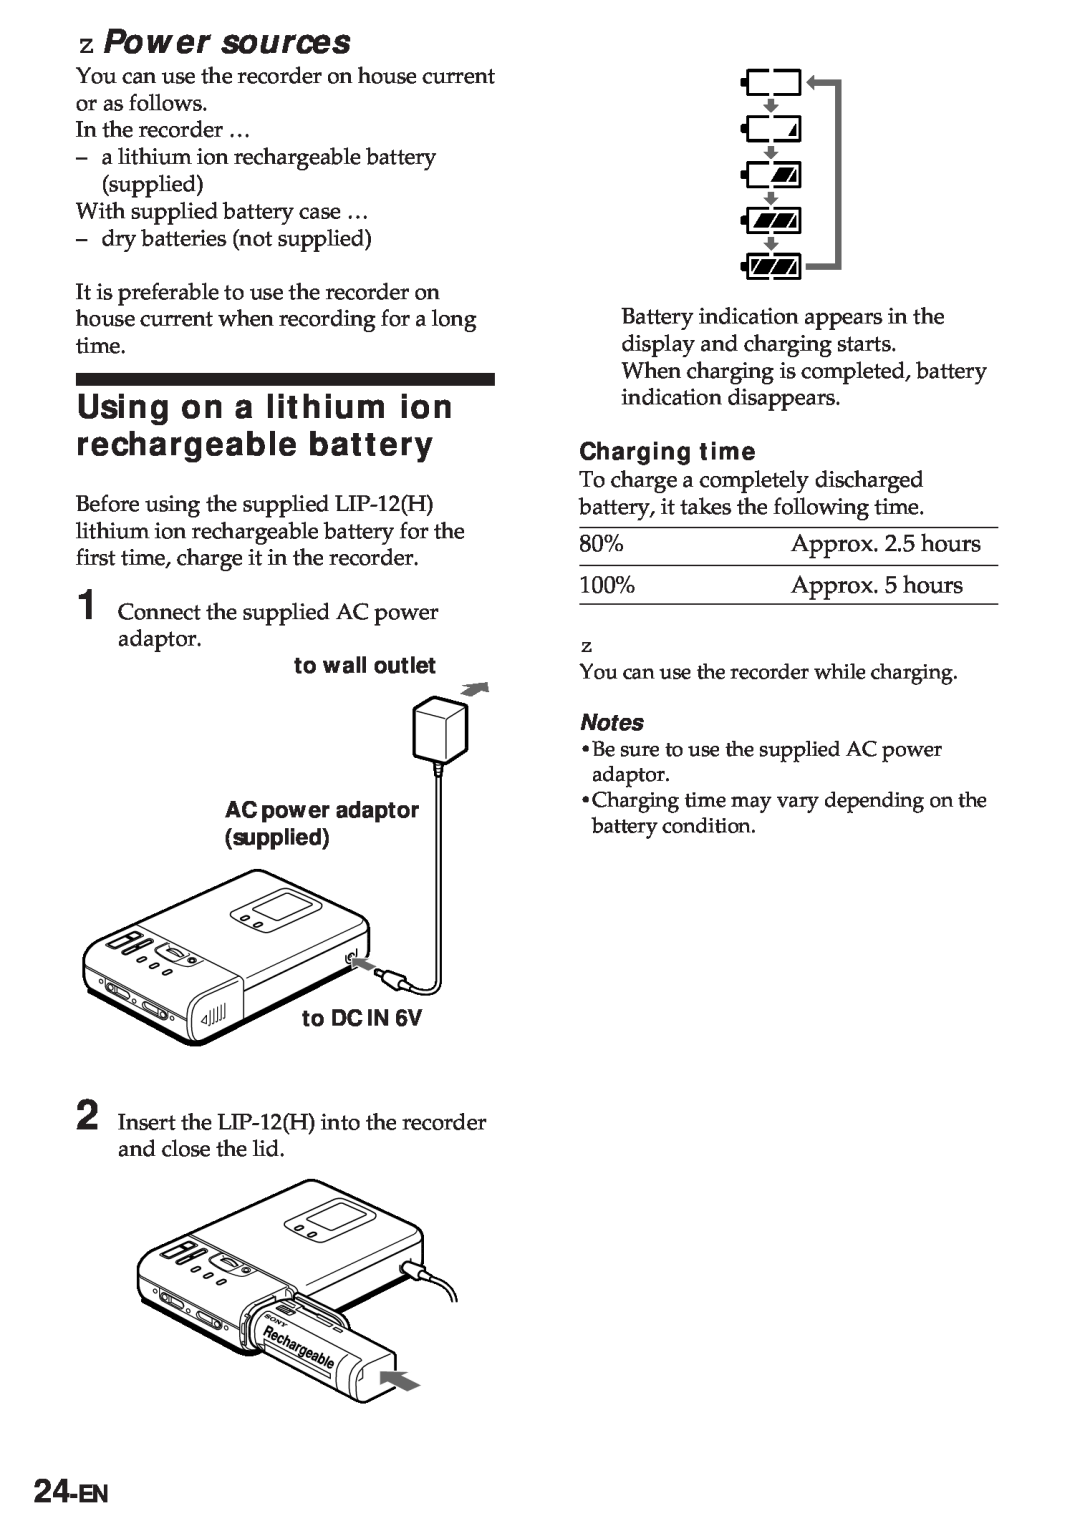 Sony MZ-R30 operating instructions z Power sources, Using on a lithium ion rechargeable battery, Charging time, 24-EN 